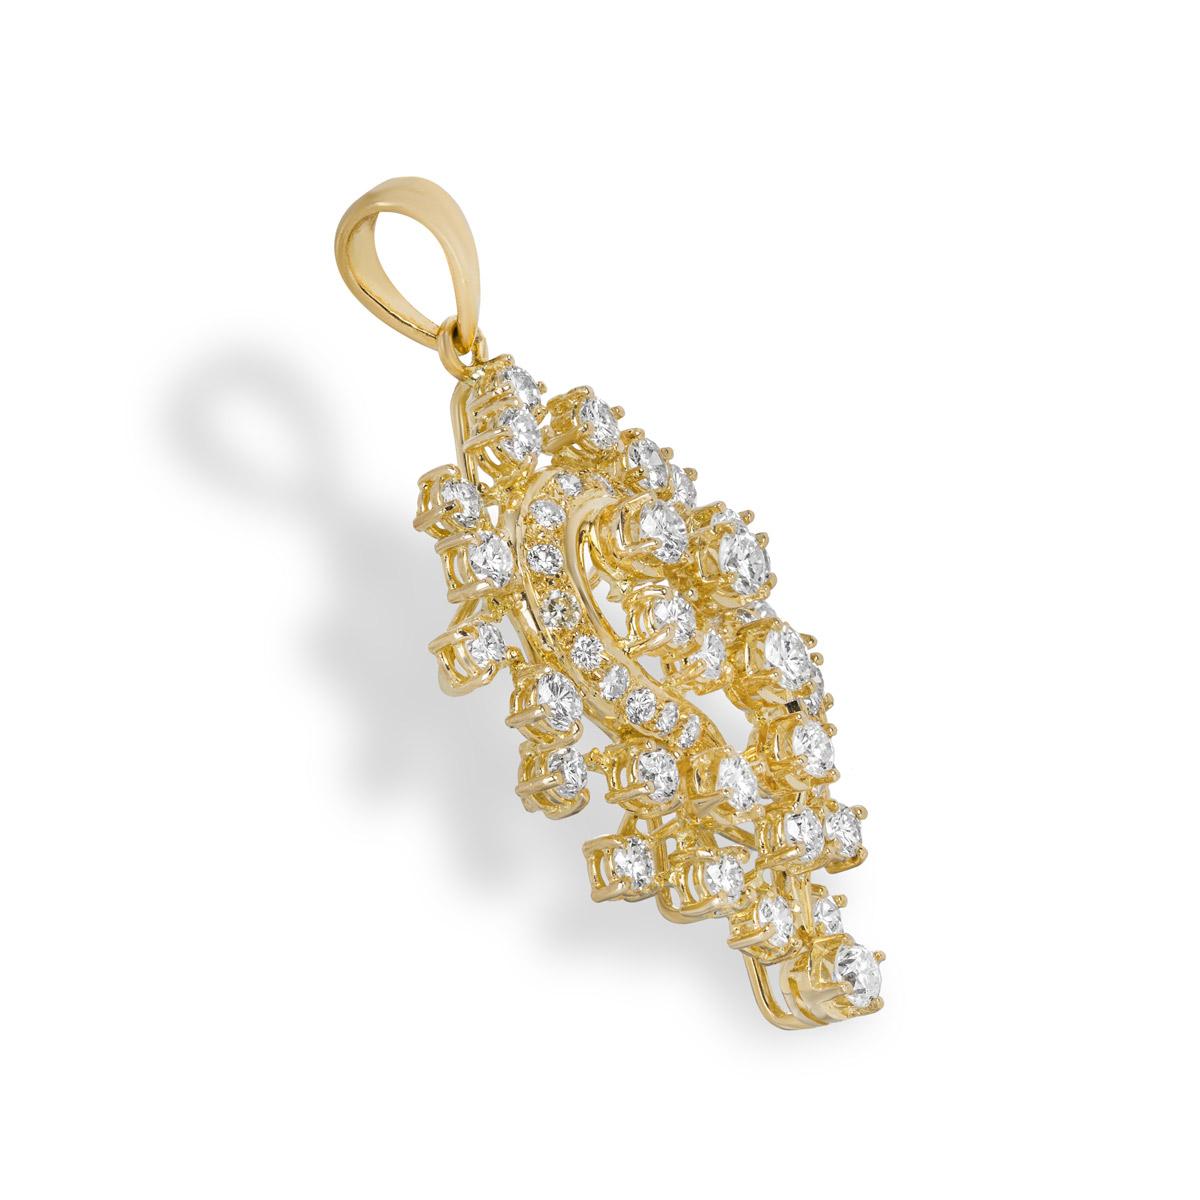 An intricate 18k yellow gold diamond pendant. The pendant is set with 48 round brilliant cut diamonds with an approximate total weight of 2.47ct, G-H colour and SI clarity. The pendant measures 4.2cm in length (including the bail) and 2.0cm in width